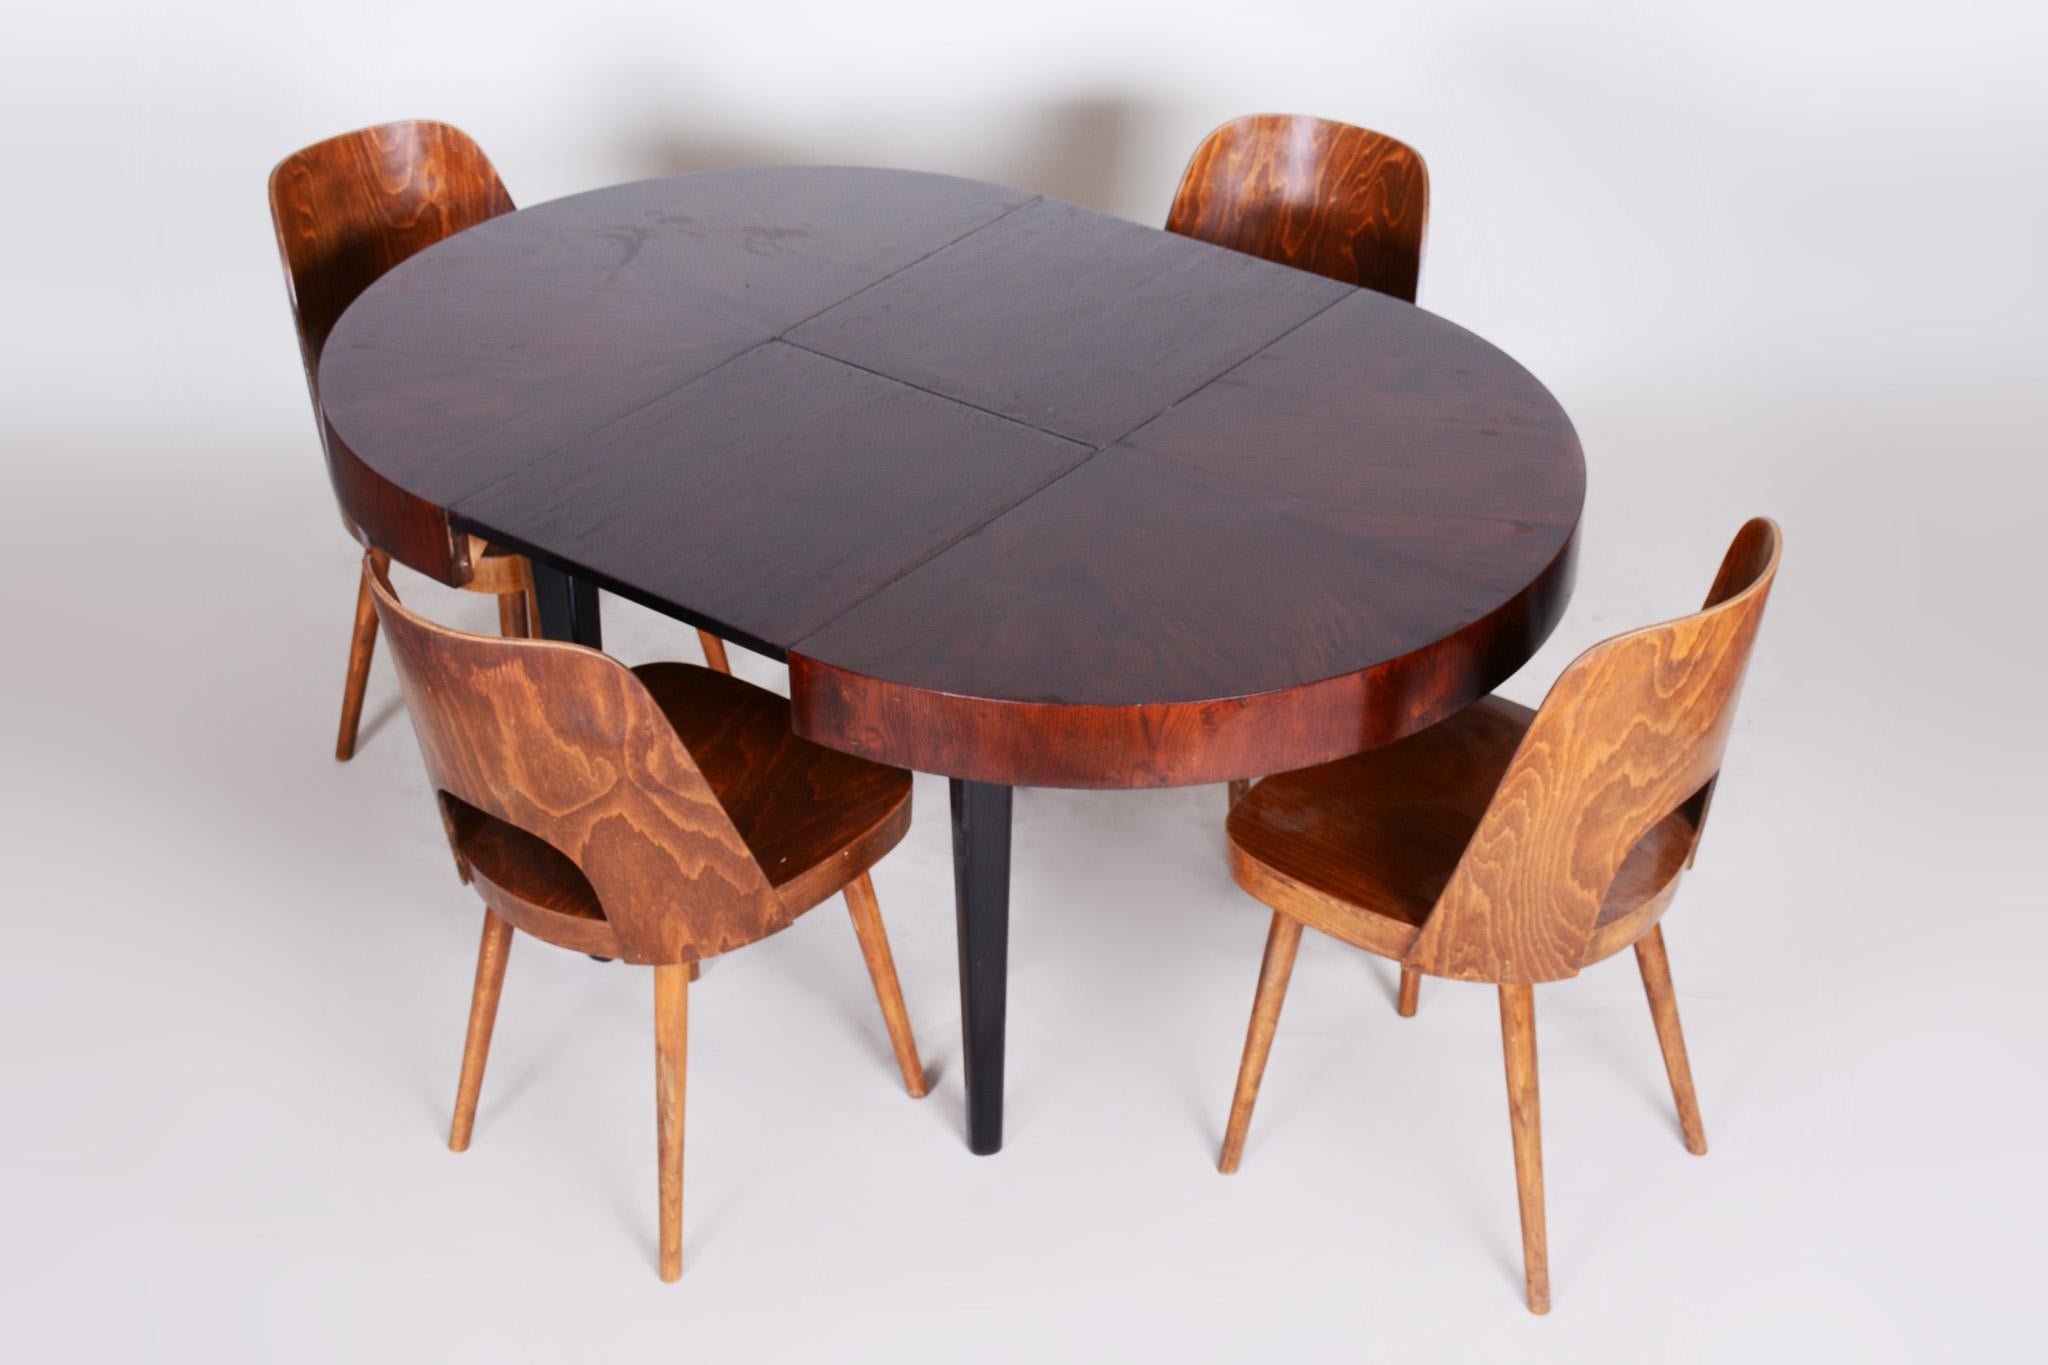 Fully Restored Art Deco Dining Table Made in the 1940s in Czechia, Beech and Oak 10